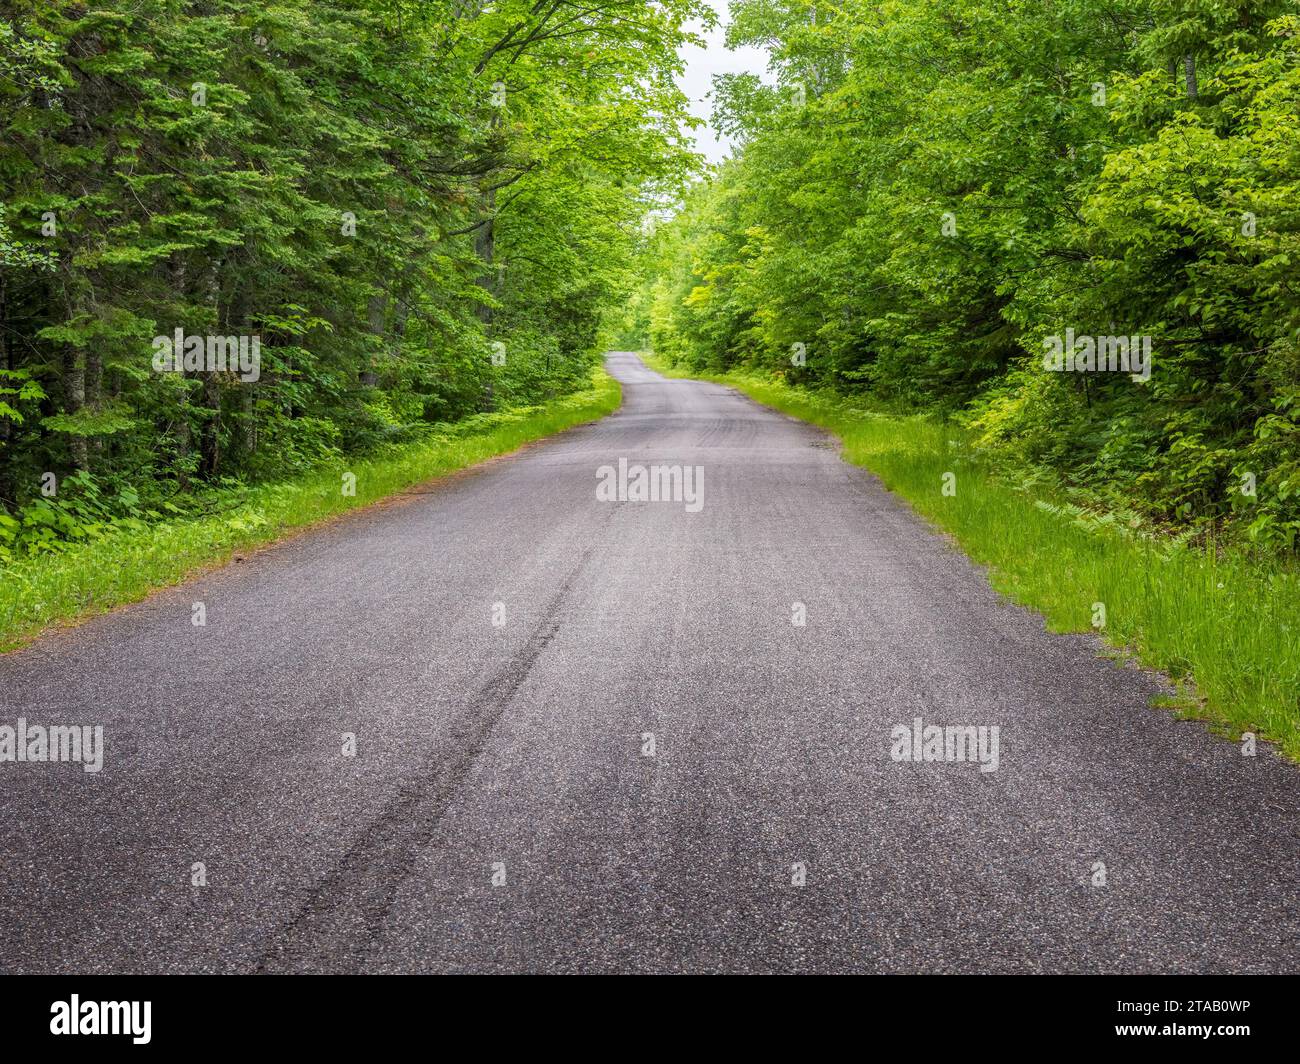 Rural road in forest, Michigan, USA Stock Photo